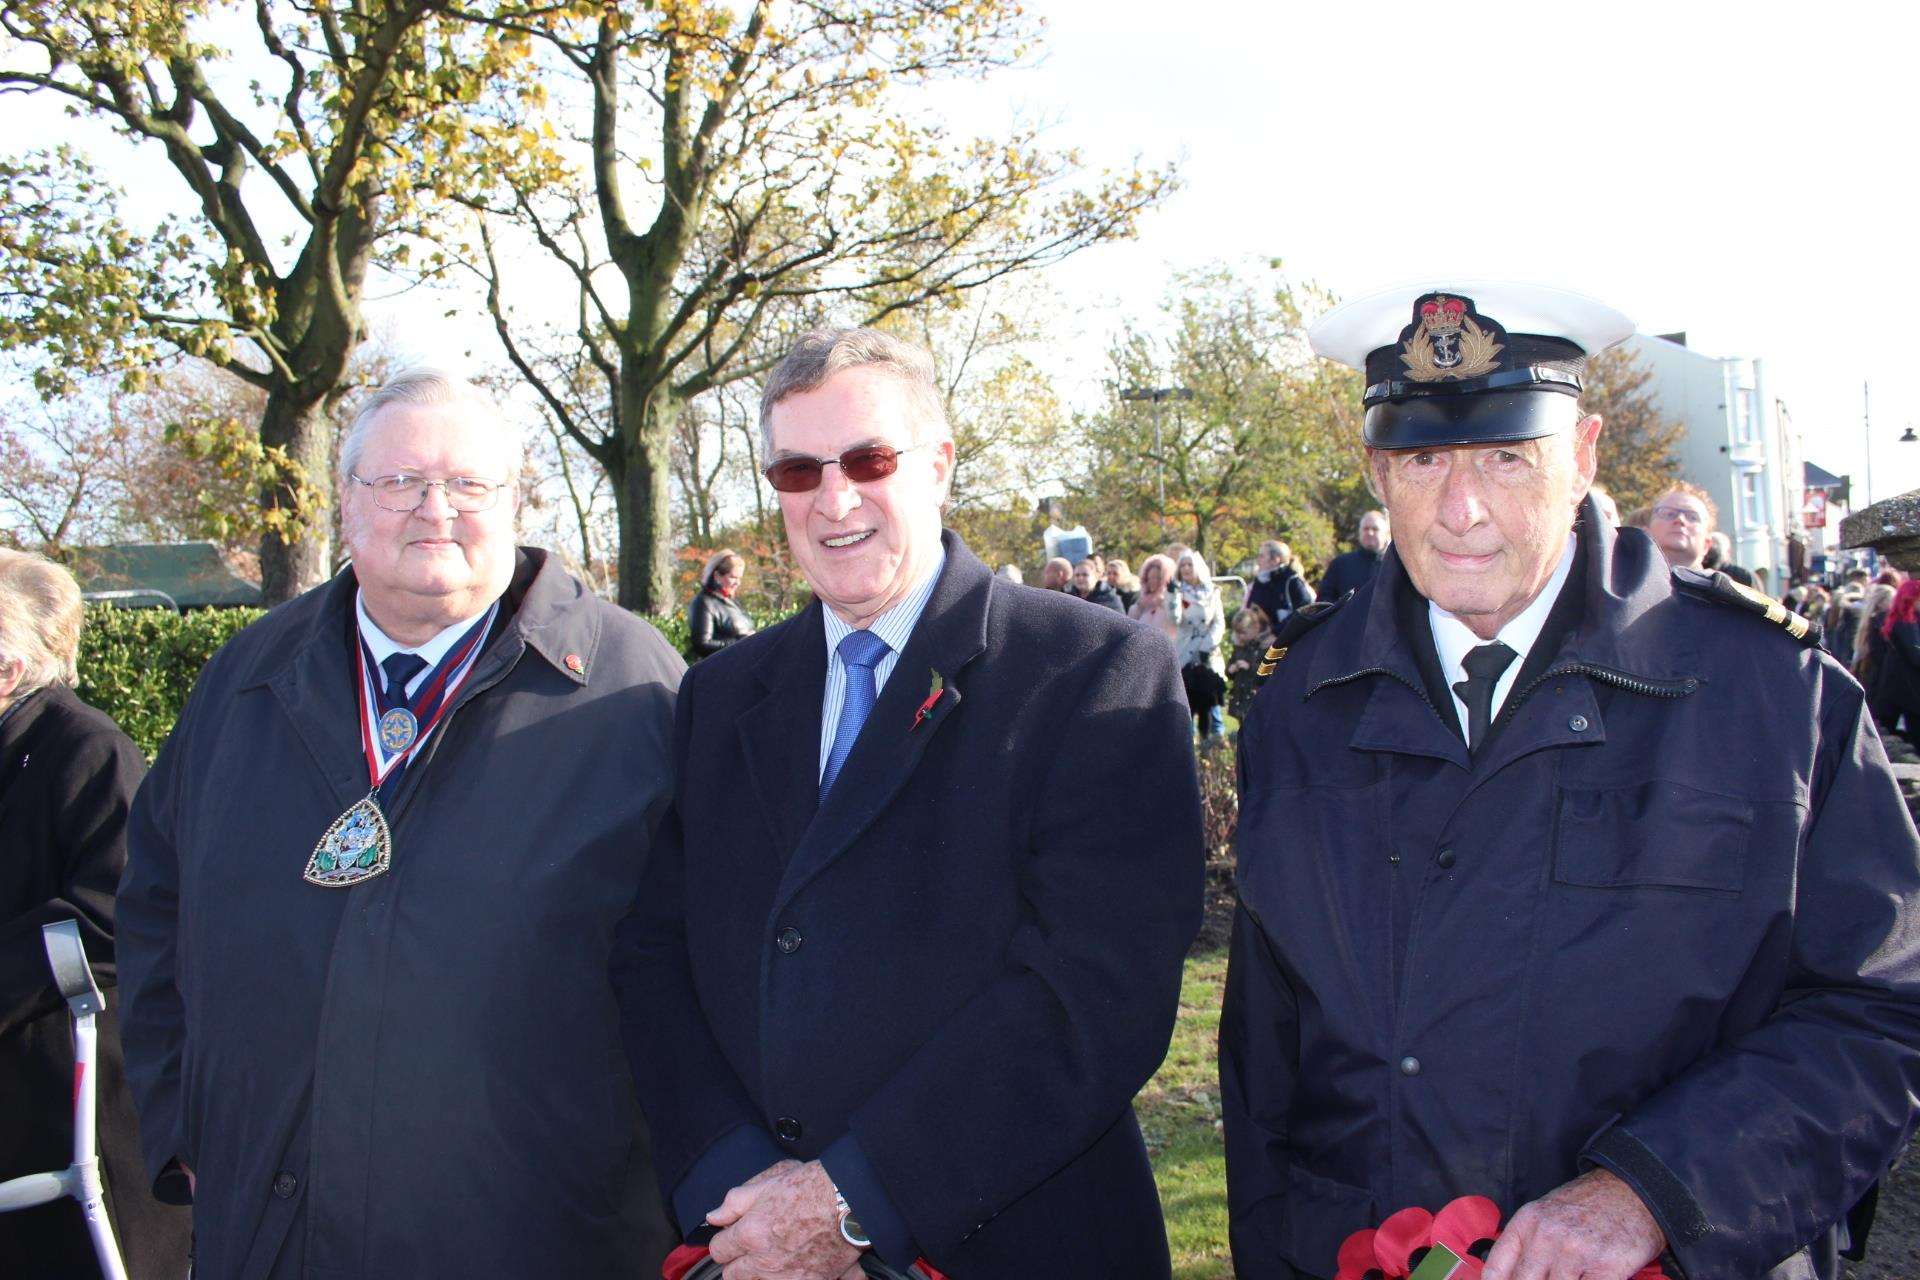 Peter MacDonald, right, with county councillor Ken Pugh, centre, and Swale's deputy mayor Cllr Ken Ingleton, left, at the Sheerness war memorial on Remembrance Sunday (5504346)